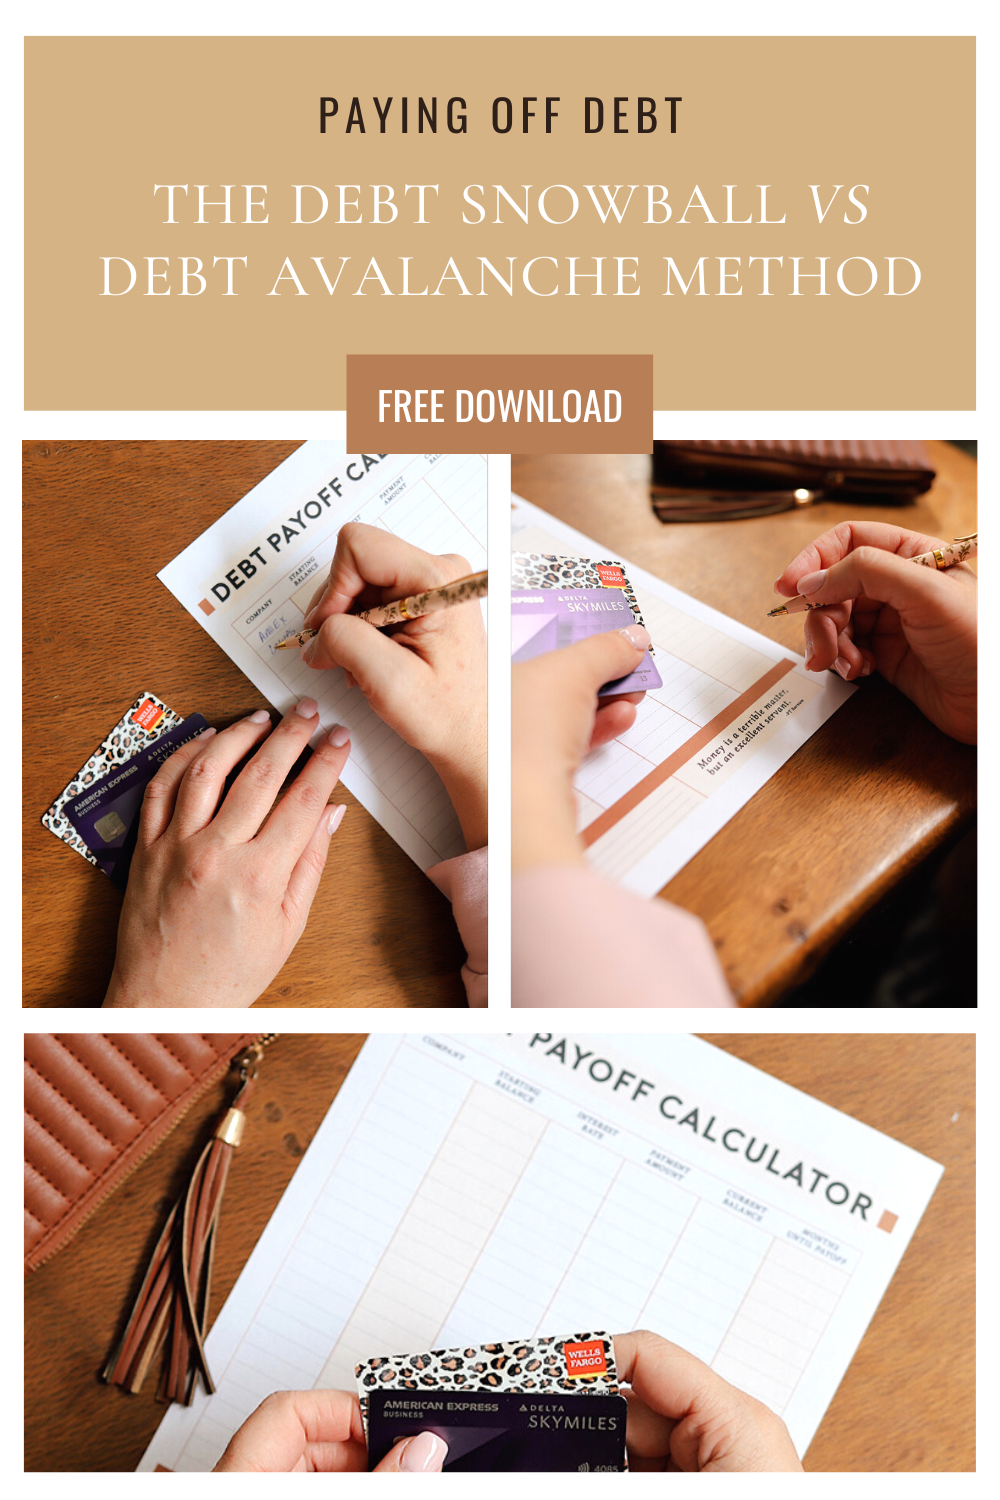 payoff your debt - free debt calculator download